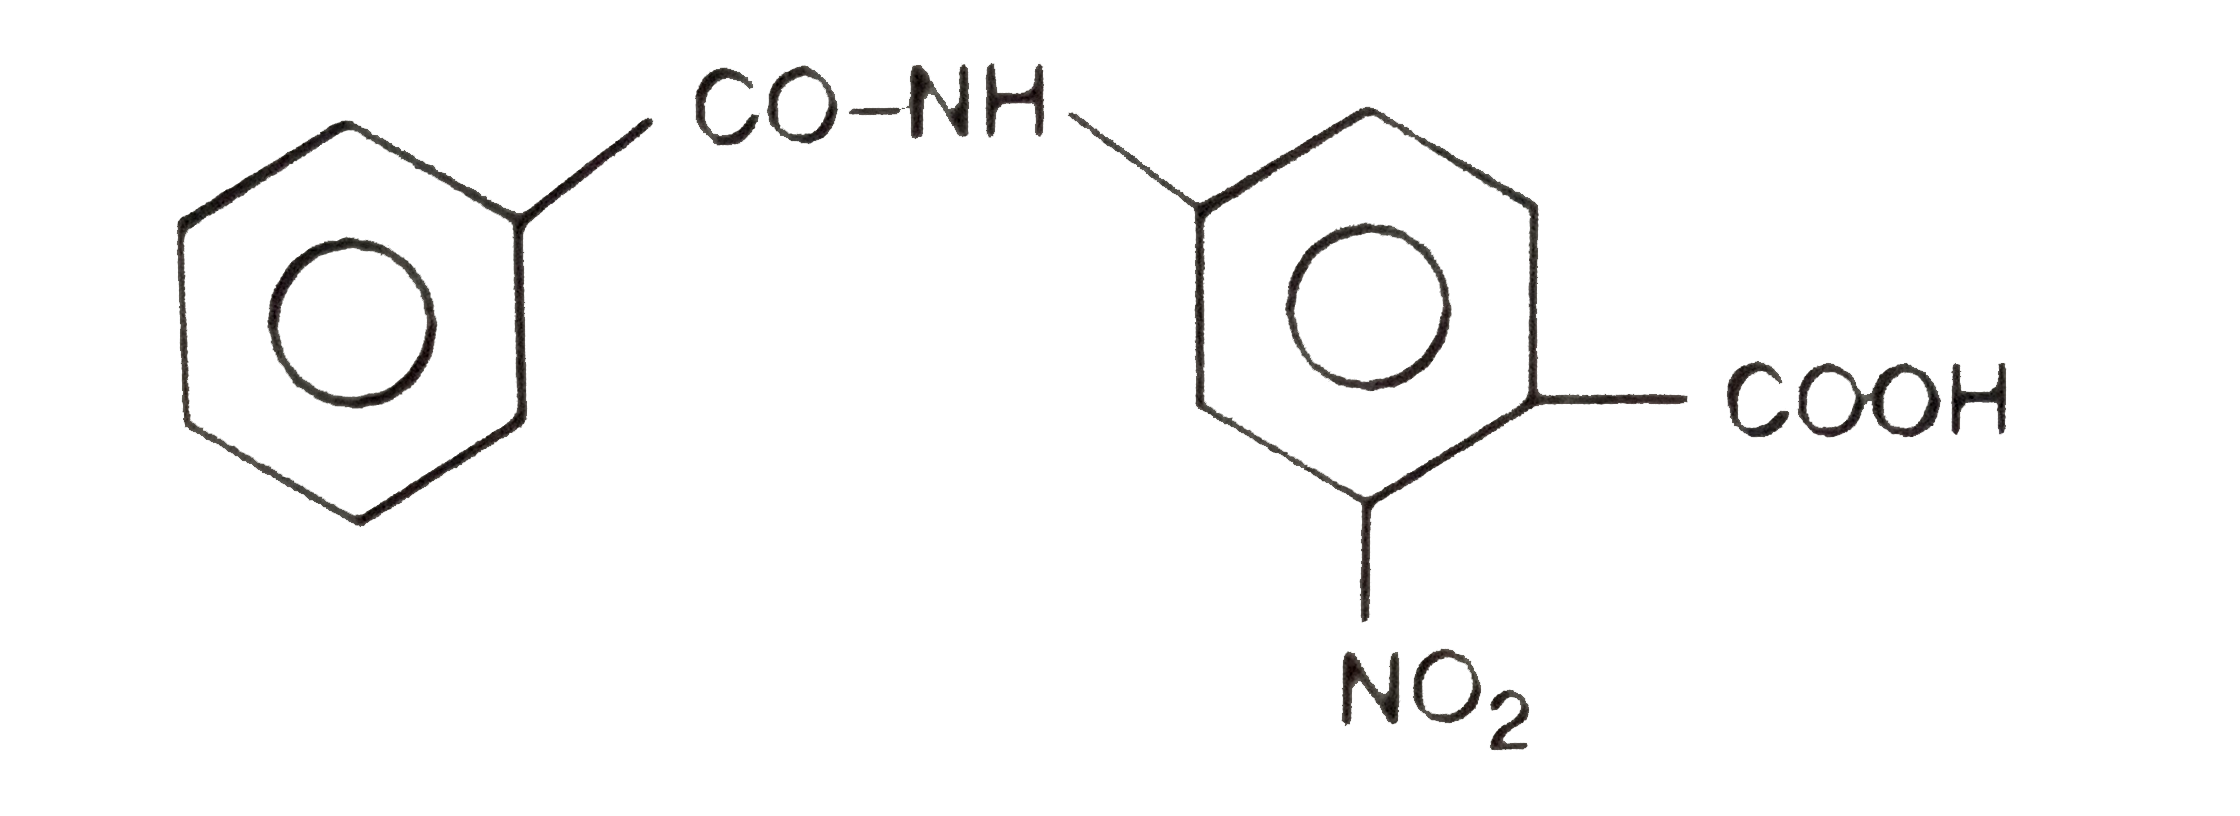 The IUPAC name of the following compound